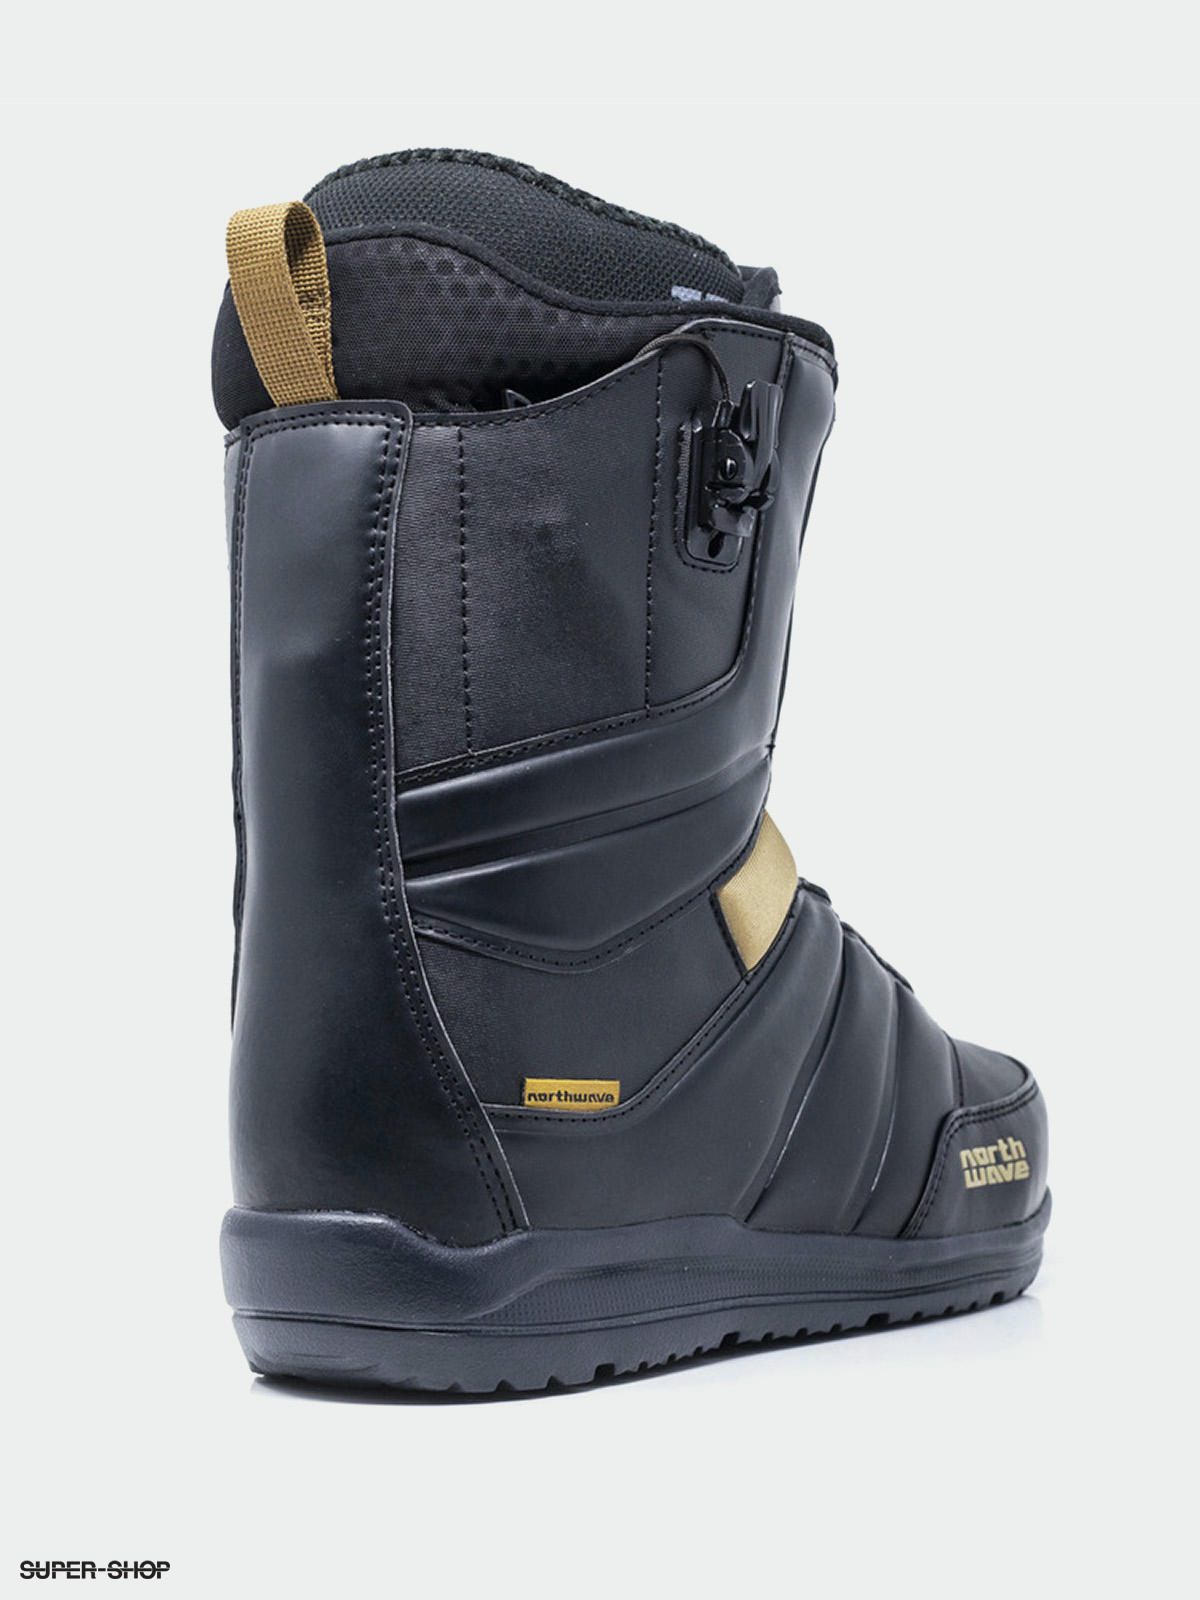 Details about   Northwave Freedom Snowboard Boots Women’s 9.5 Black 